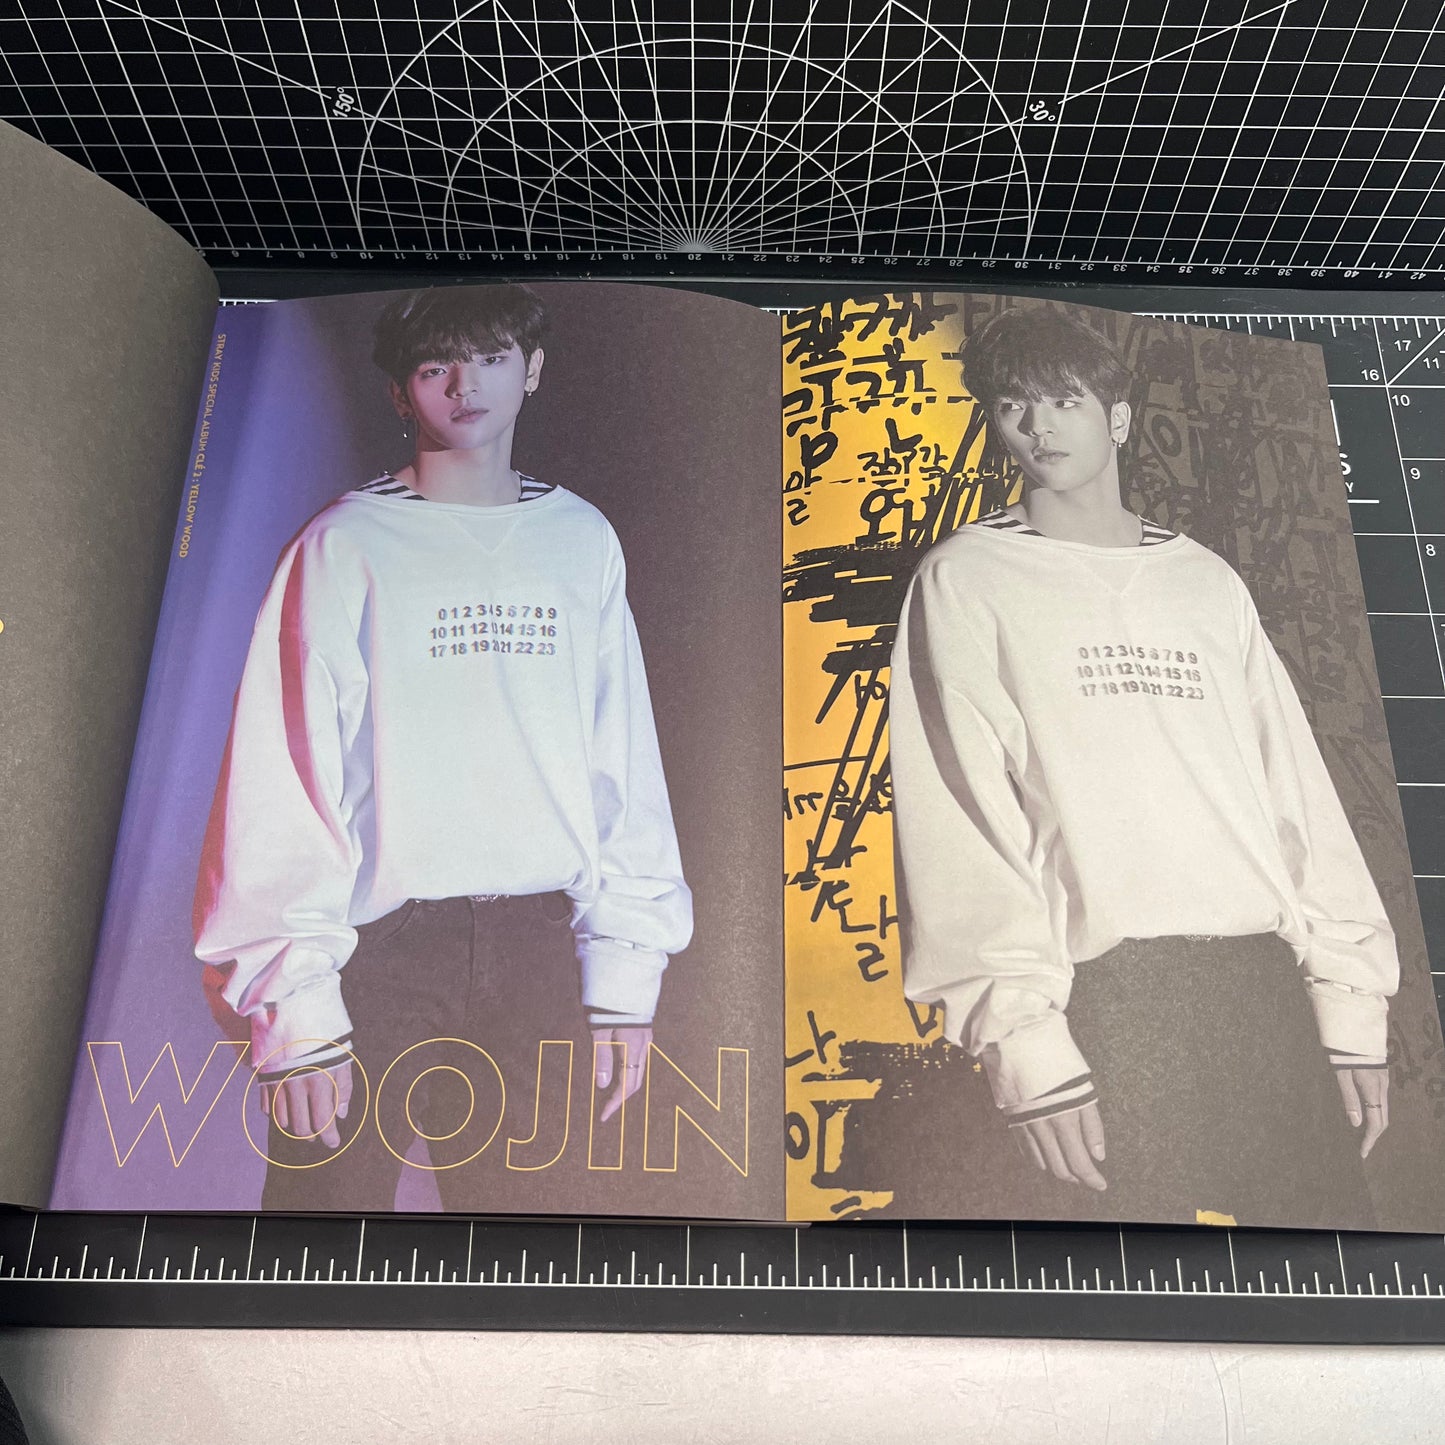 Stray Kids Special Album CLÉ : YELLOW WOOD (CLÉ 2) - Woojin Poster